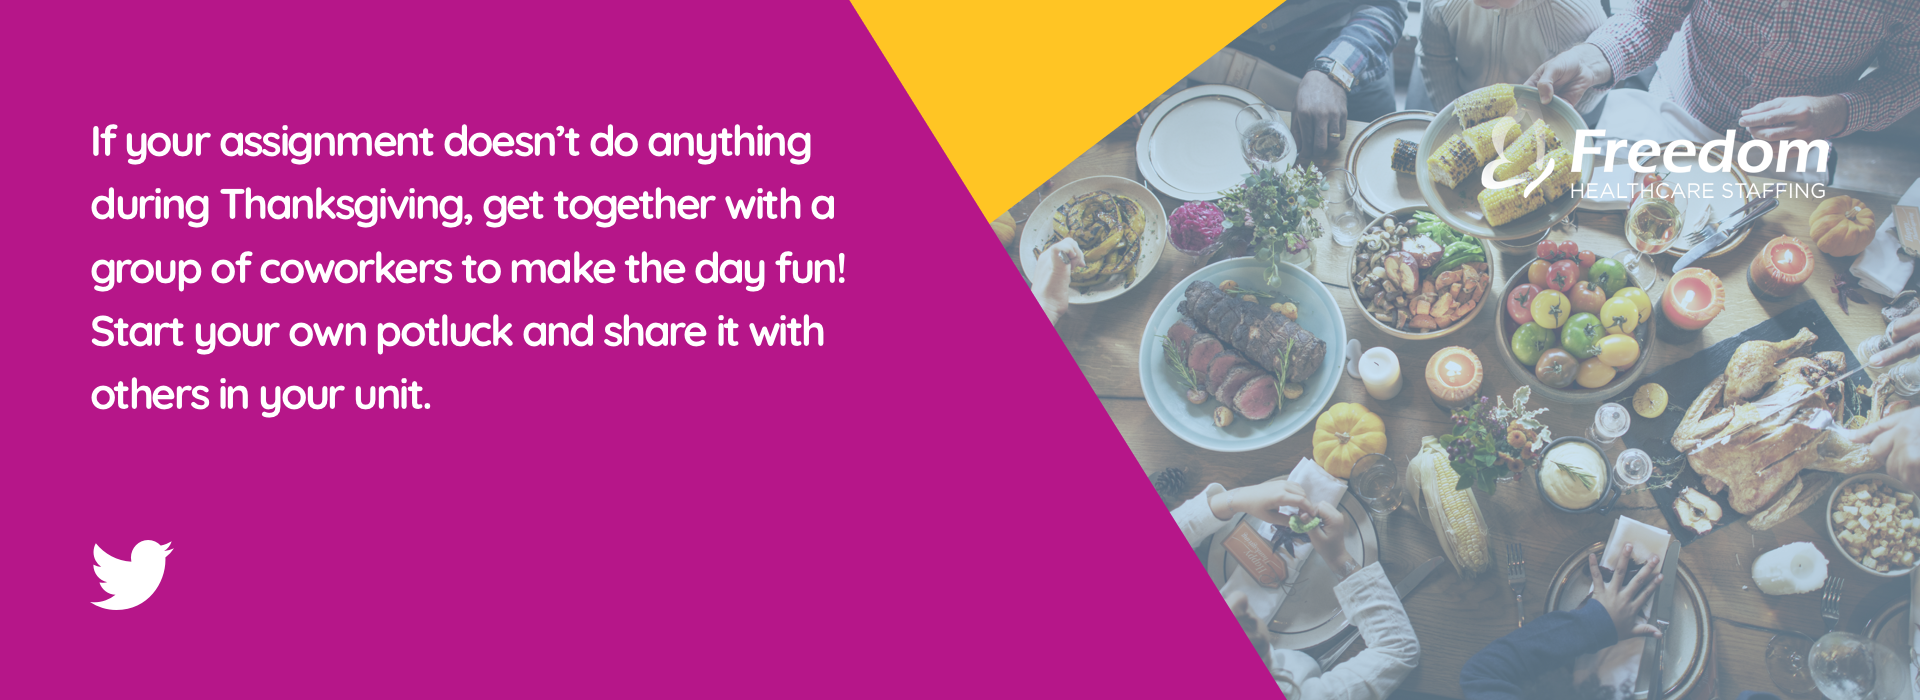 If your assignment doesn’t do anything during Thanksgiving, get together with a group of coworkers to make the day fun! Start your own potluck and share it with others in your unit.